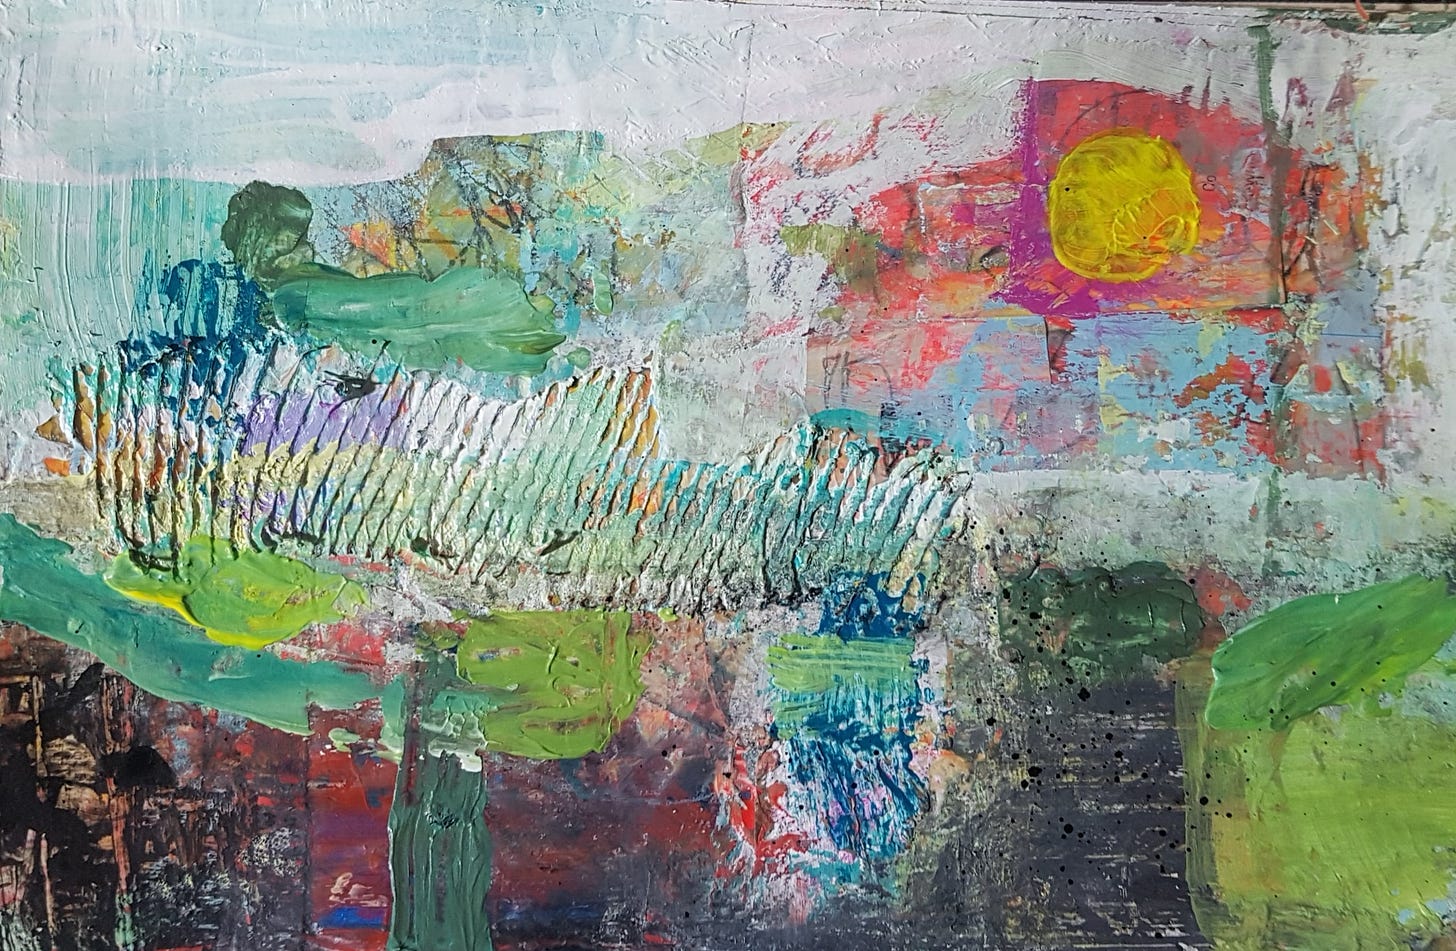 Sketchbook painting with layers of collage and acrylic paint by Julia Laing 2023